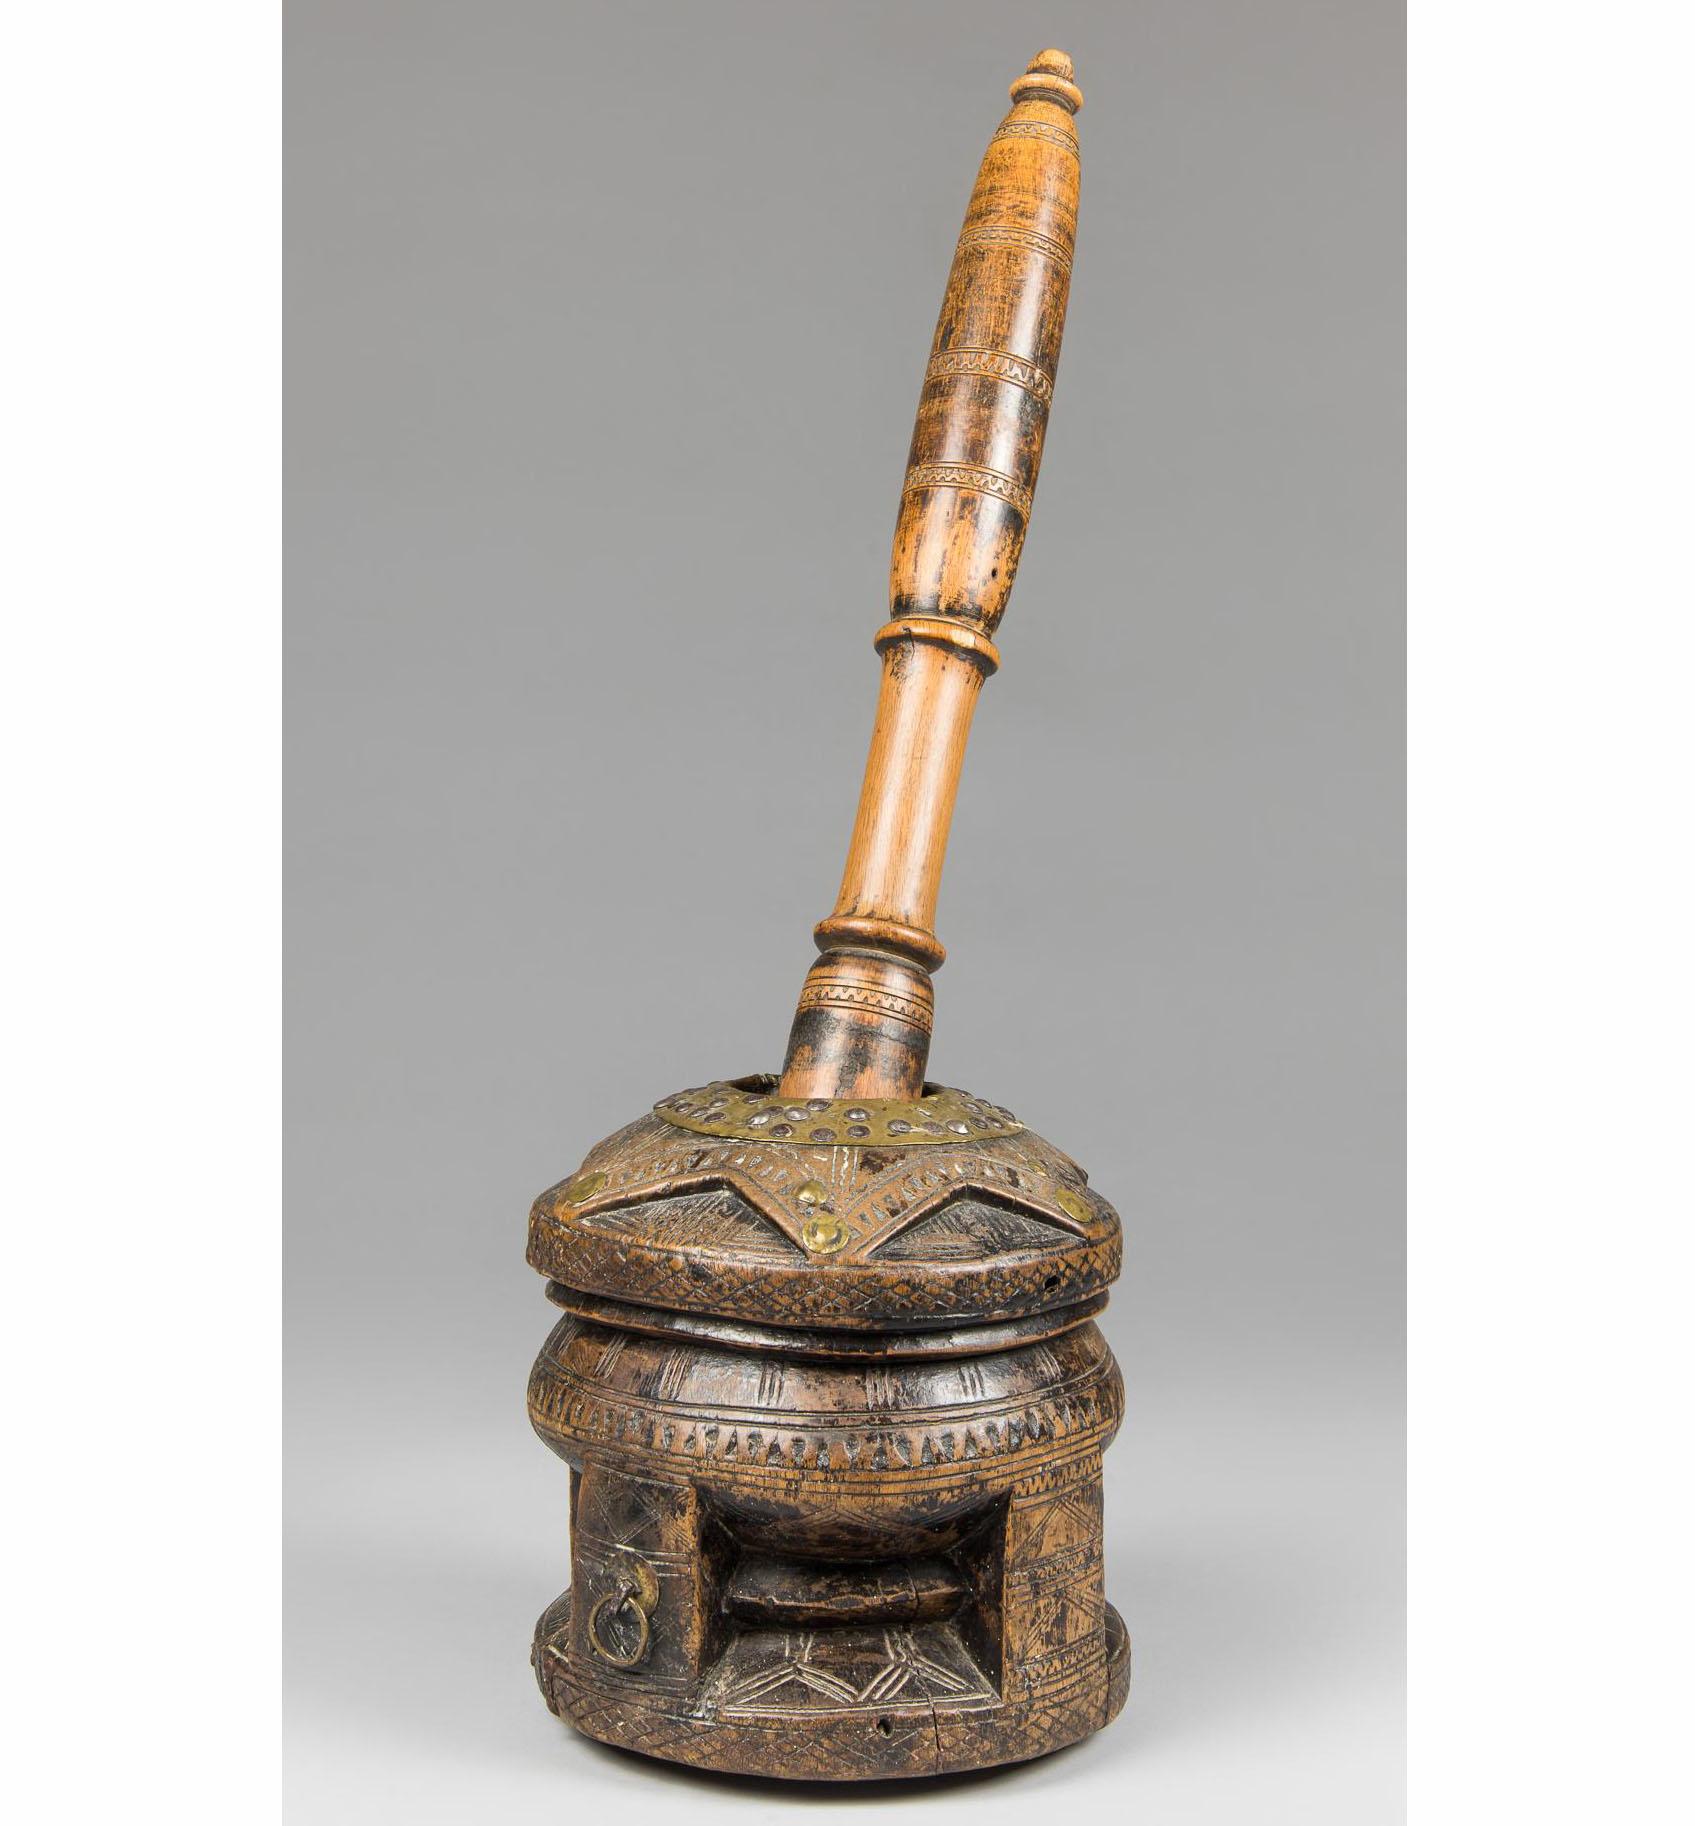 Old carved wood Coffee Mortar Somalia Bedouin

Heavy hard wood with carved detail and metal attachments complete with carved pestle 

condition old cracks repaired on mortar but fine

Period early 20th century

Nice decorative antique item

 
 
 